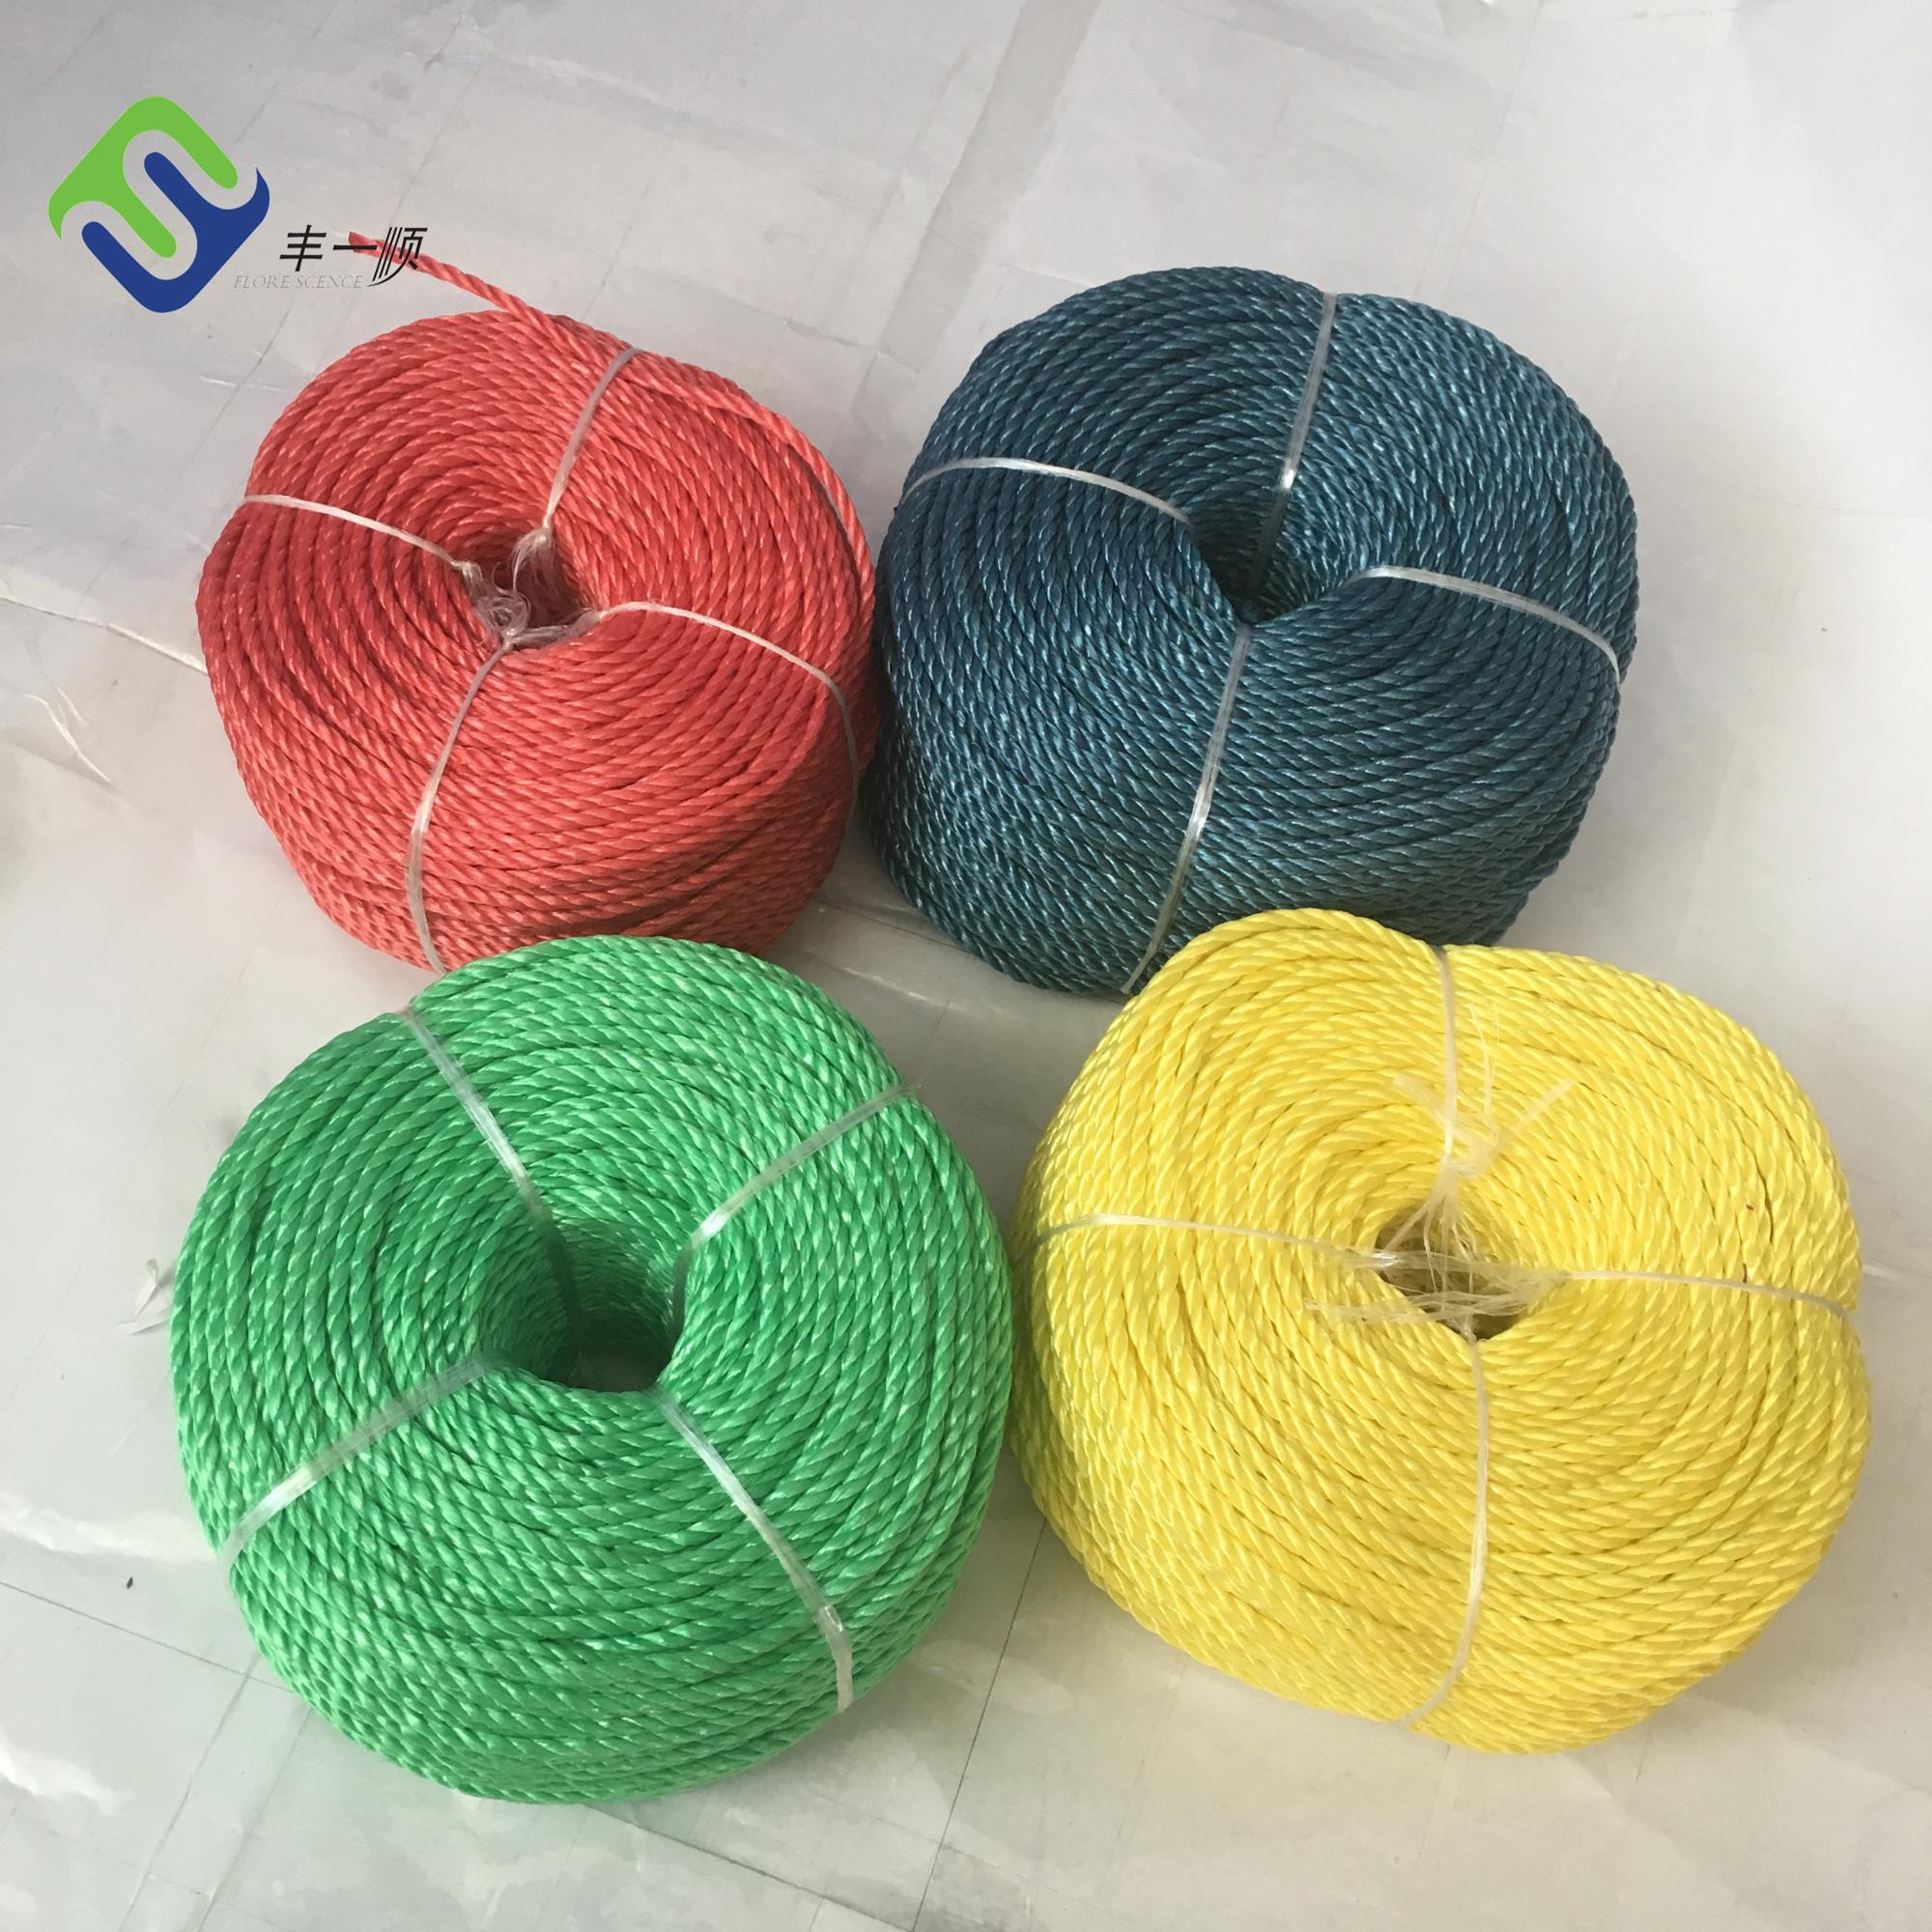 China Quality assured PP plastic packing rope factory and